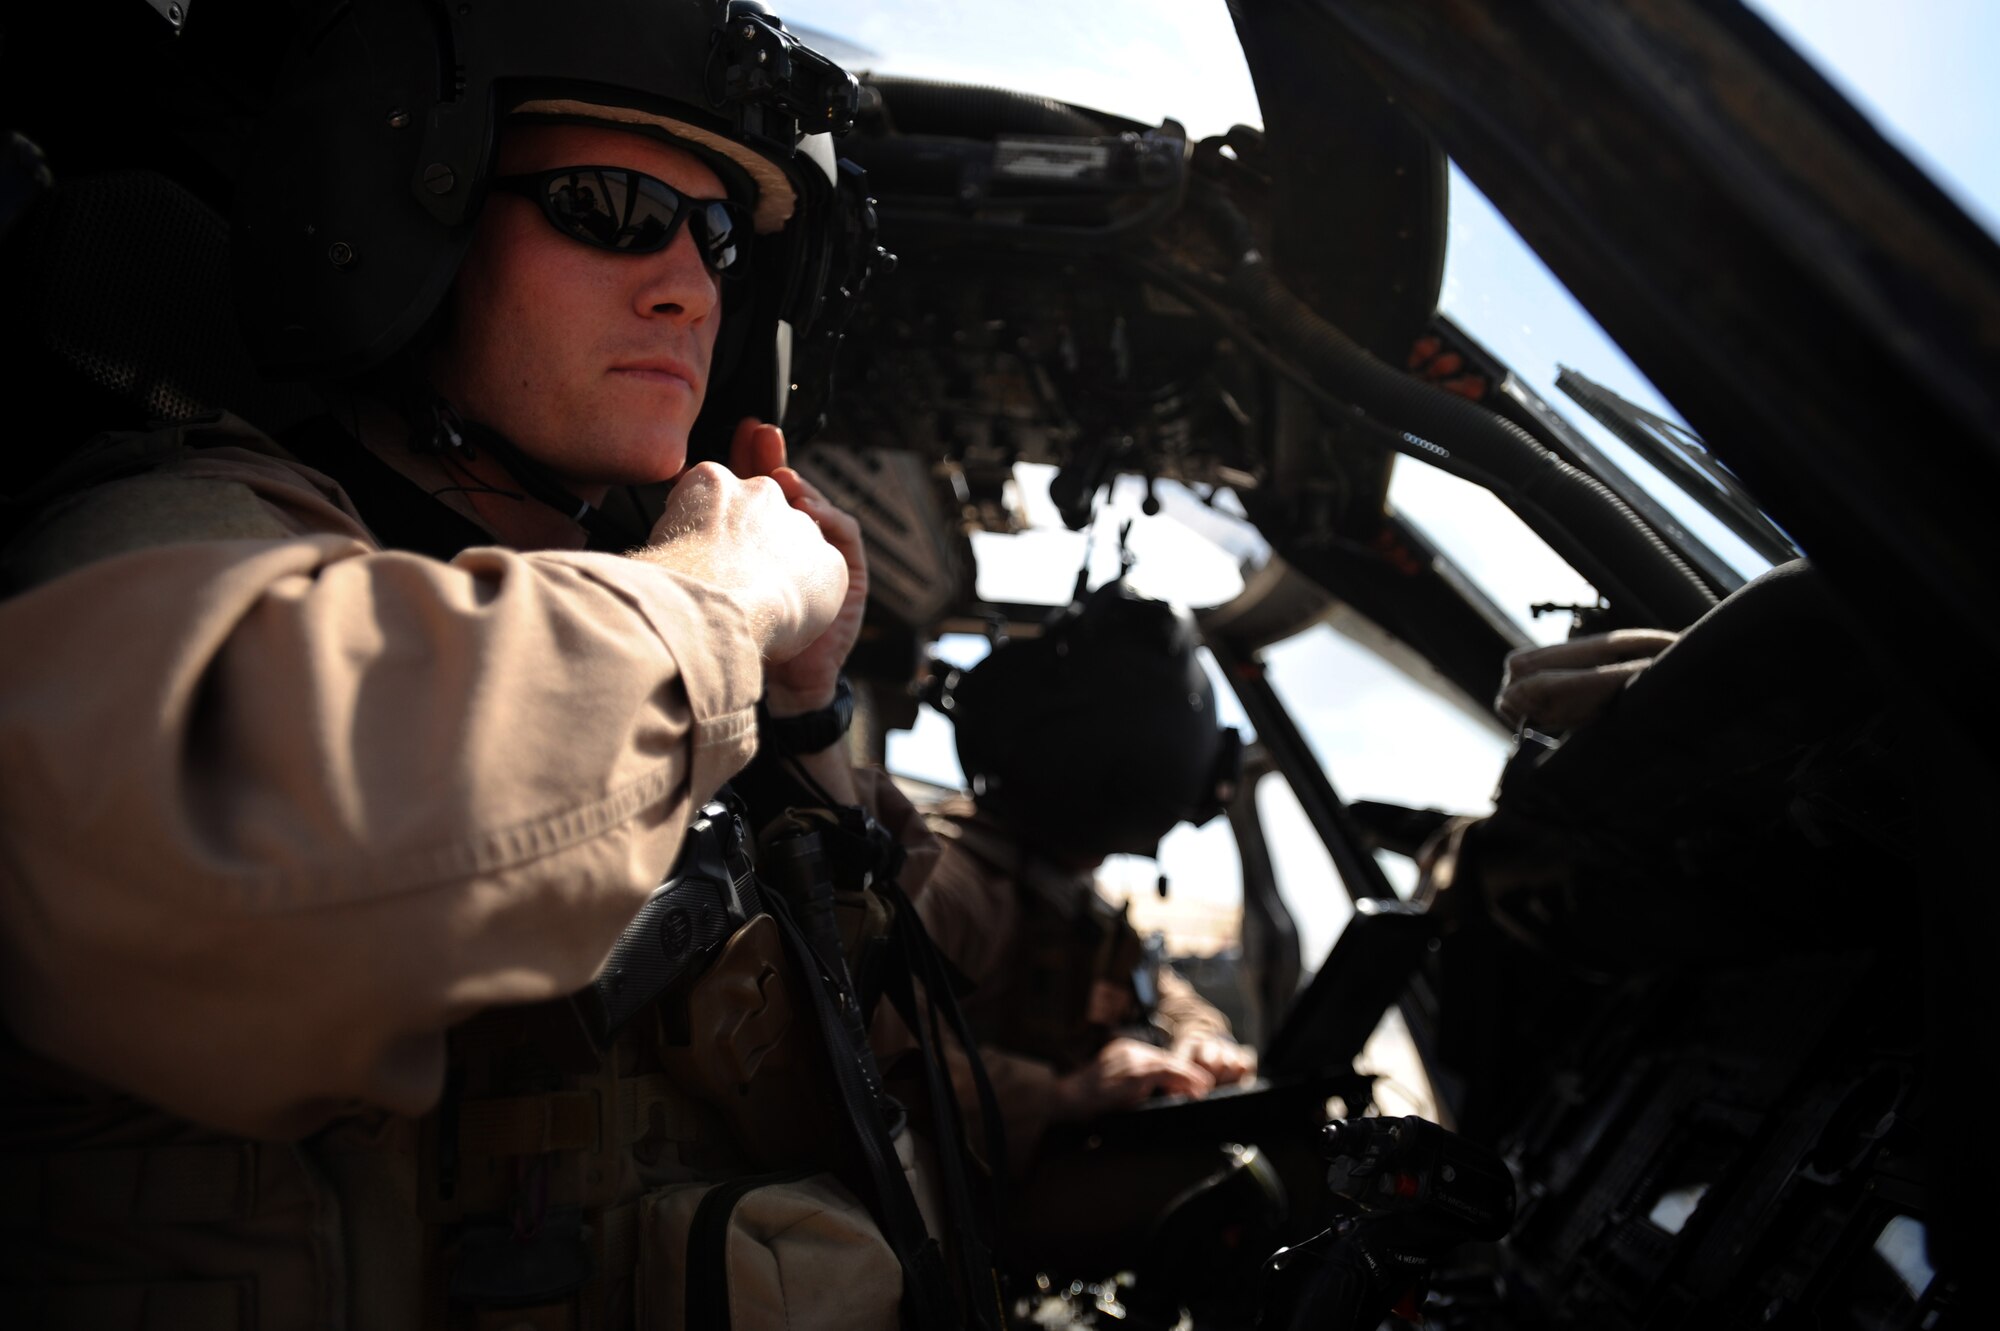 U.S. Air Force Captain Jay Humphrey, HH-60G Pavehawk helicopter pilot assigned to the 64th Expeditionary Rescue Squadron, Joint Base Balad, Iraq, attaches his helmet prior to a proficiency exercise April 10, 2009, in support of Operation Iraqi Freedom.  (U.S. Air Force photo by Staff Sgt. James L. Harper Jr.)